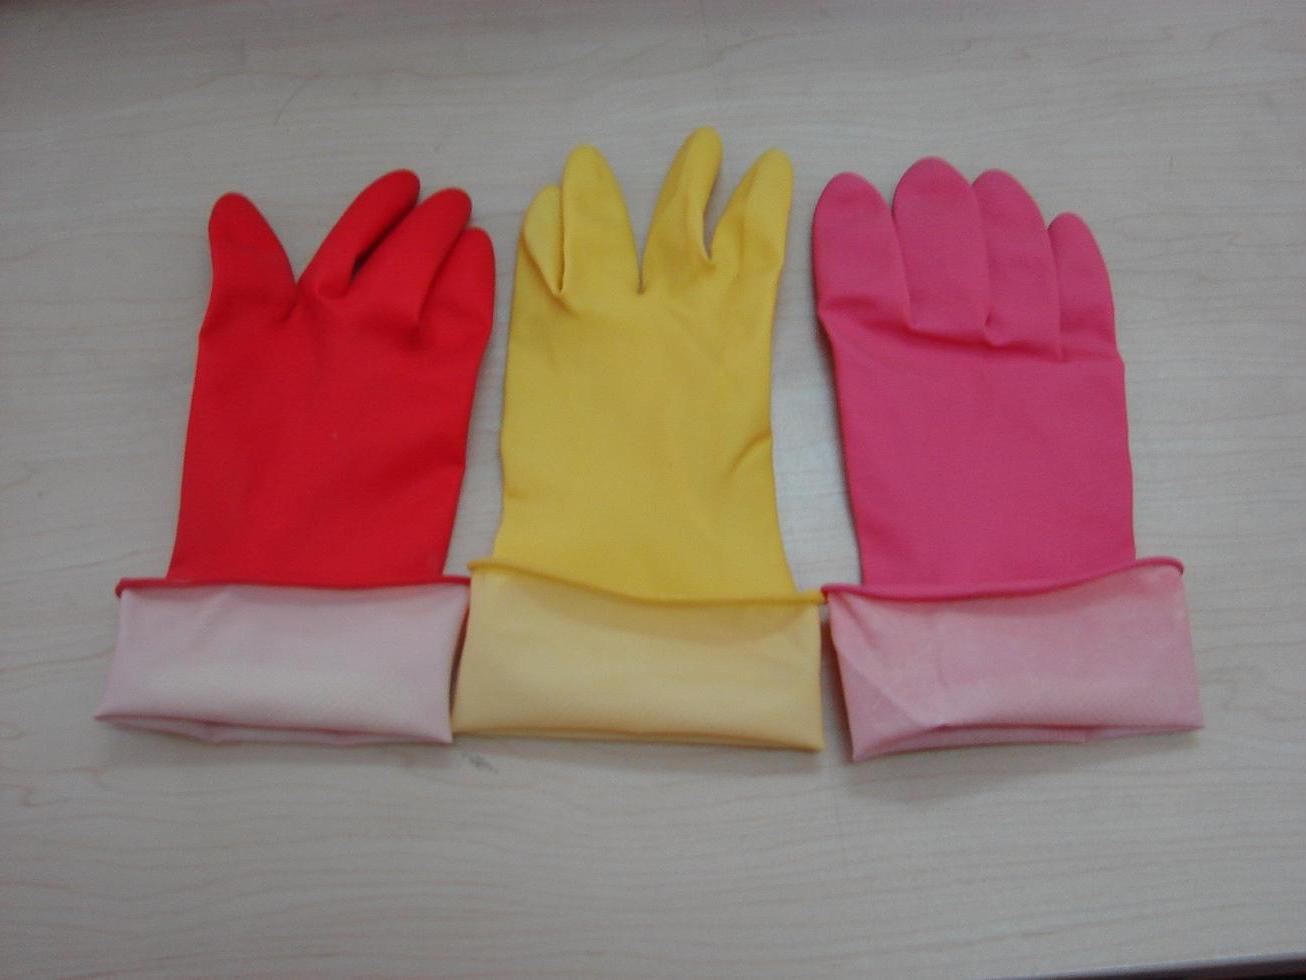 household latex glove. Inquire now